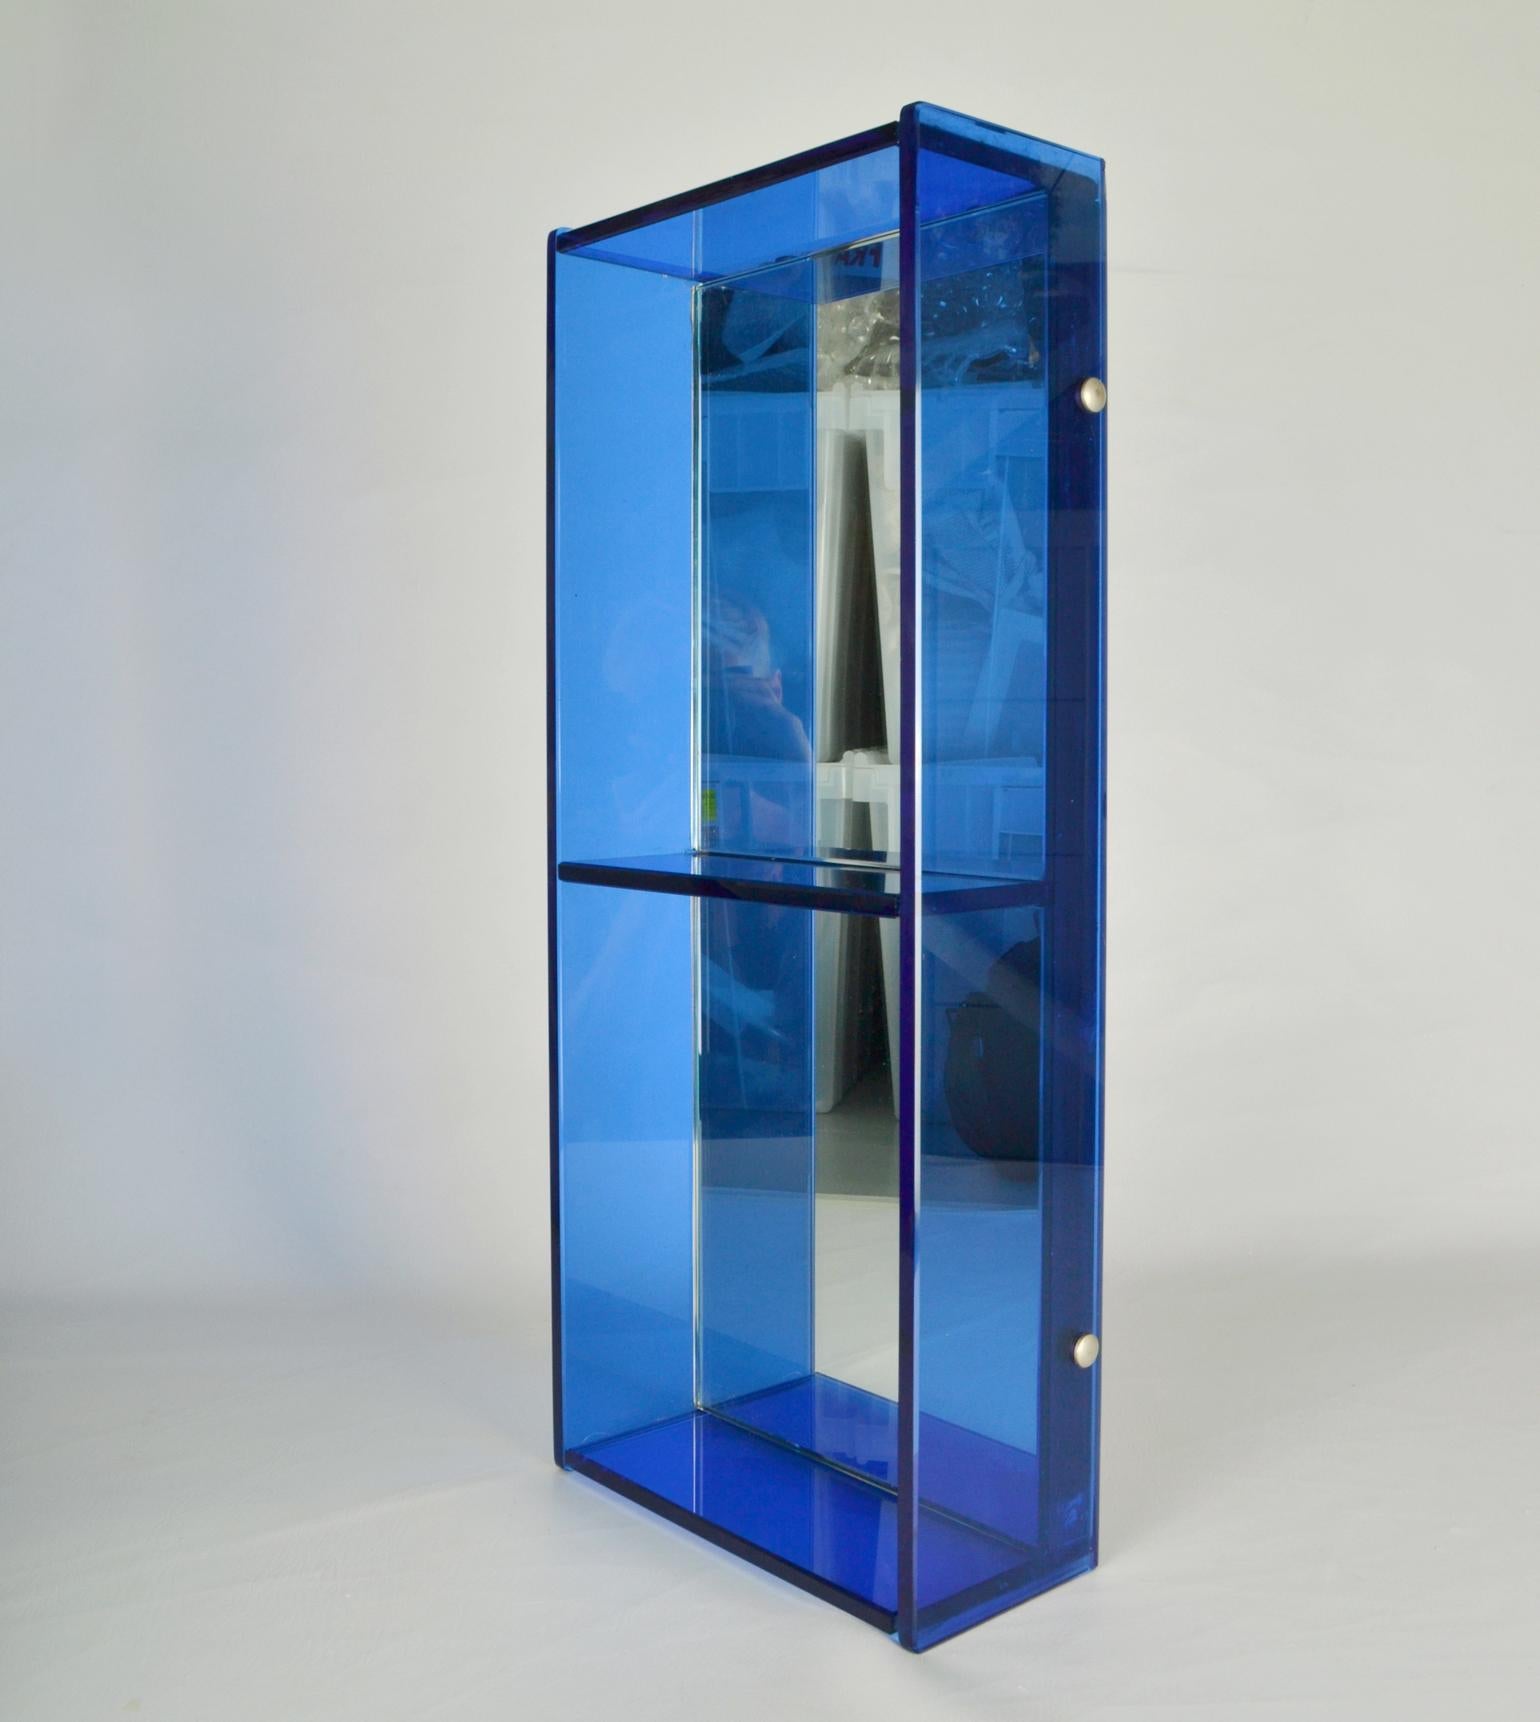 Blue christal glass mirror & wall shelf attributed to Fontana Arte / Cristal Arte, 1960's. The rectangular mirror has two square compartments with blue outer glass borders and a back mirror. 
Vertical or horizontal hung mirror is perfect for a